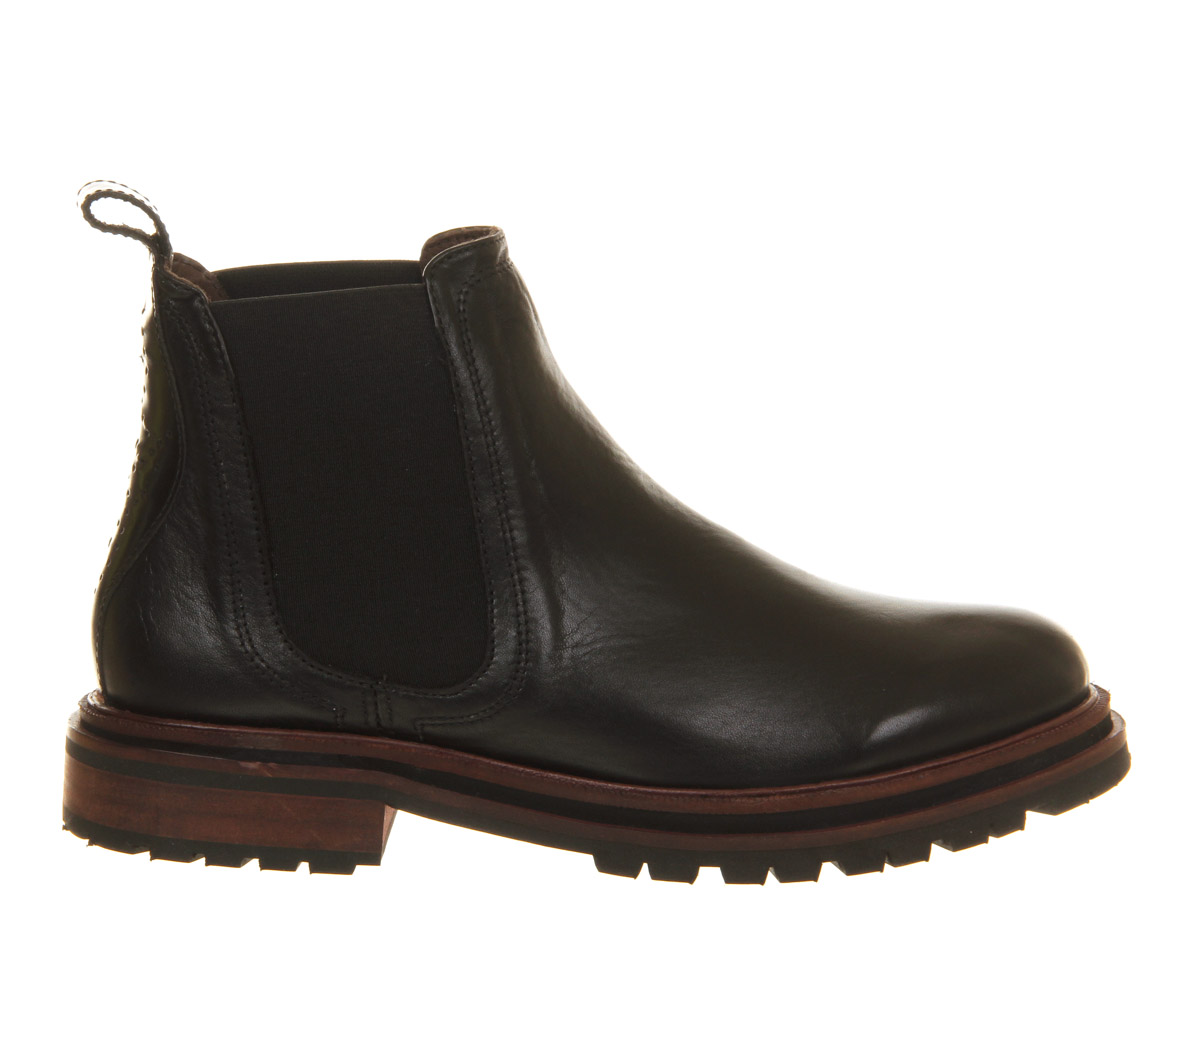 Hudson London Wistow Chelsea Black Leather - Women's Ankle Boots